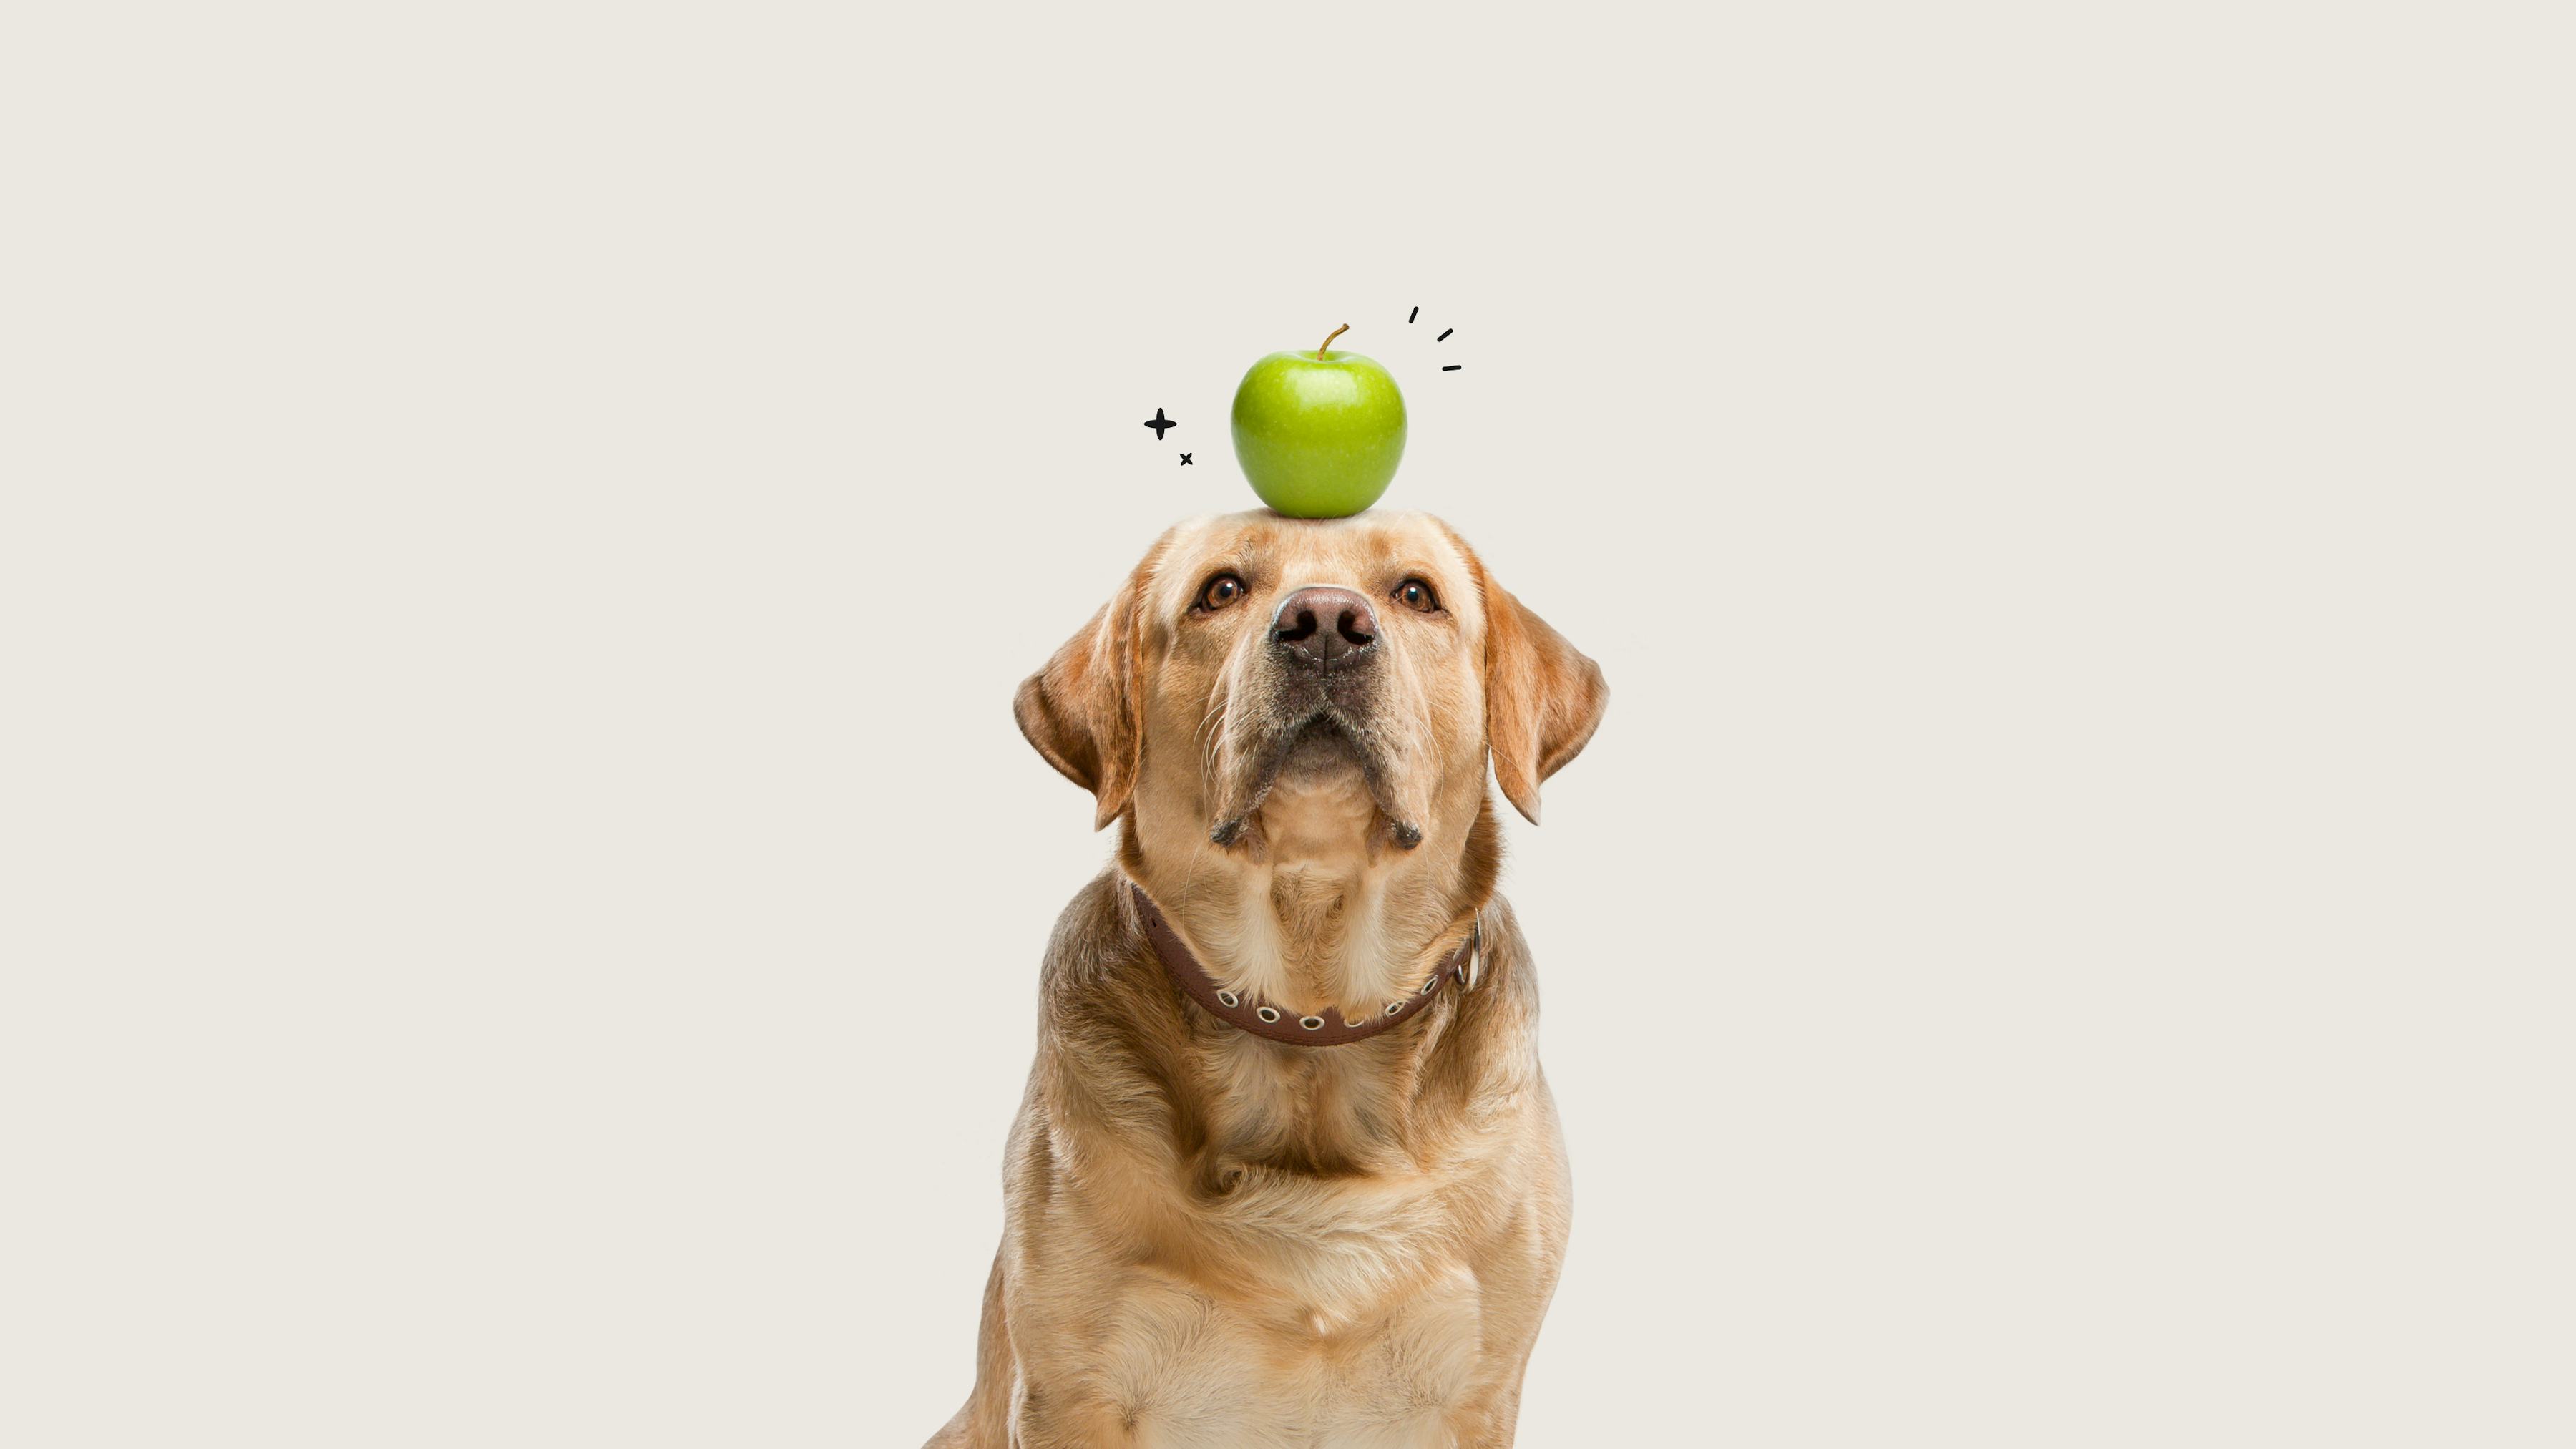 Just Food For Dogs project thumbnail: A golden retriever with a green apple on it’s head